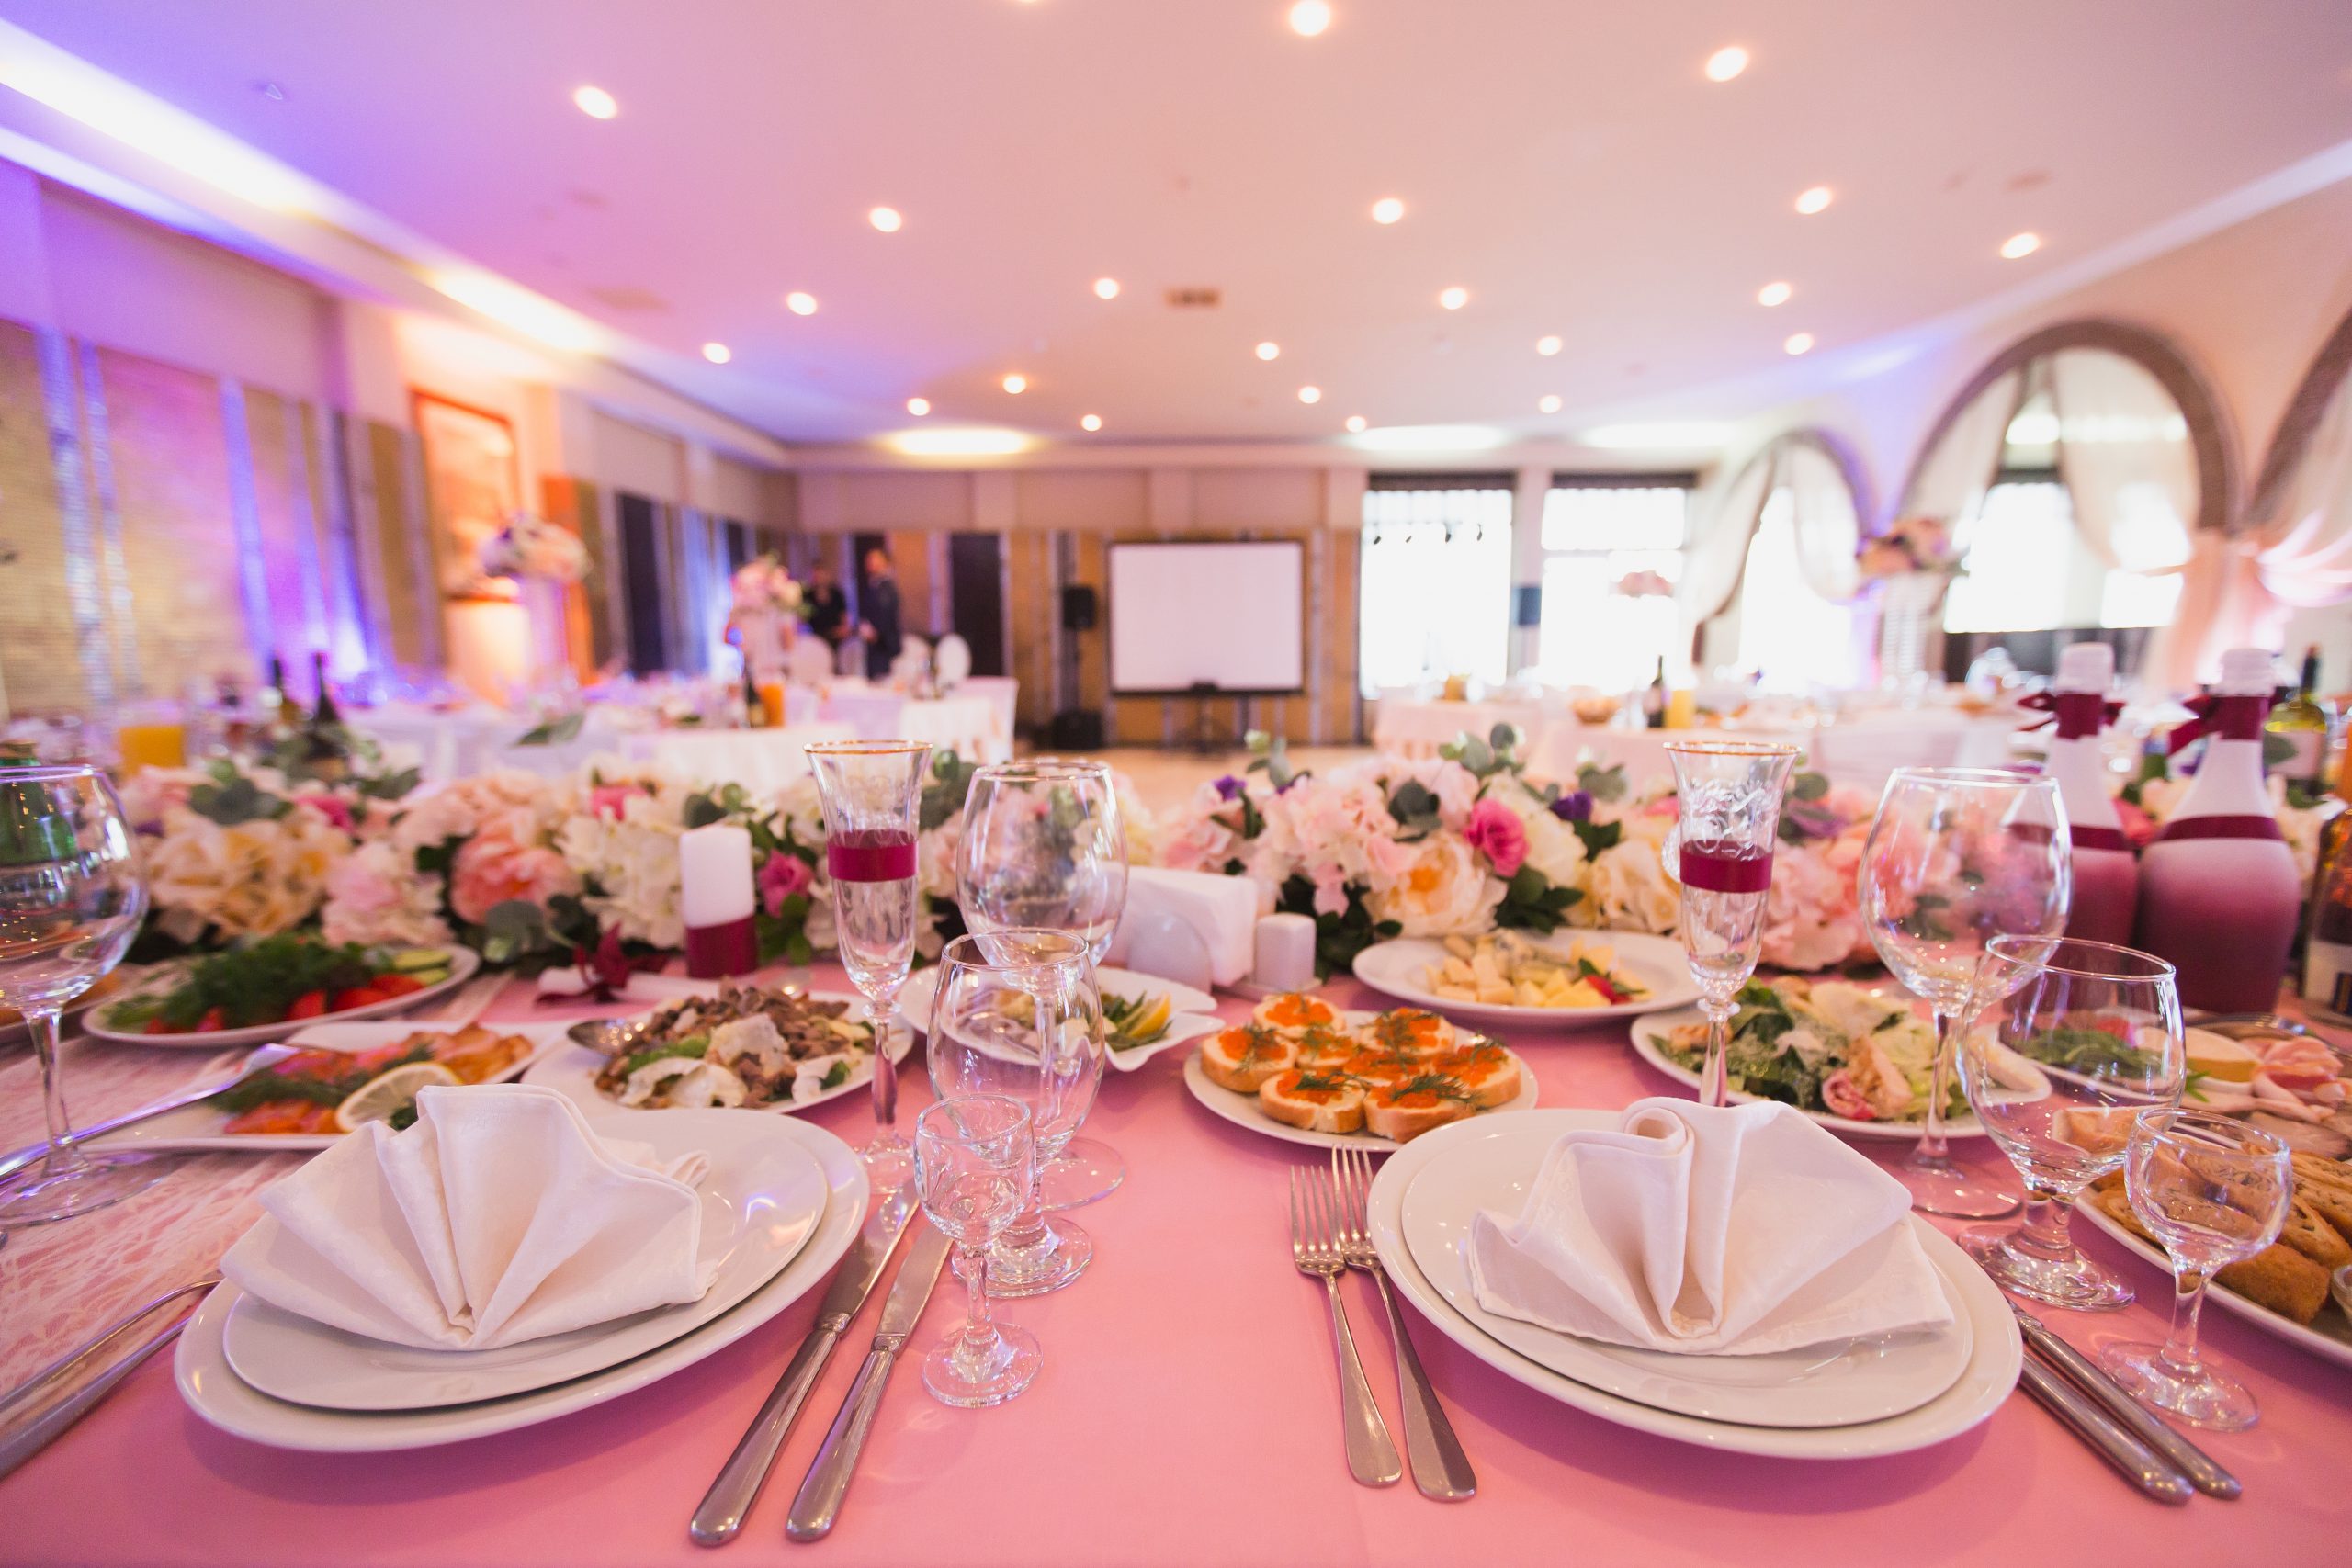 Steps For Selecting The Best Catering Services For Your Special Event